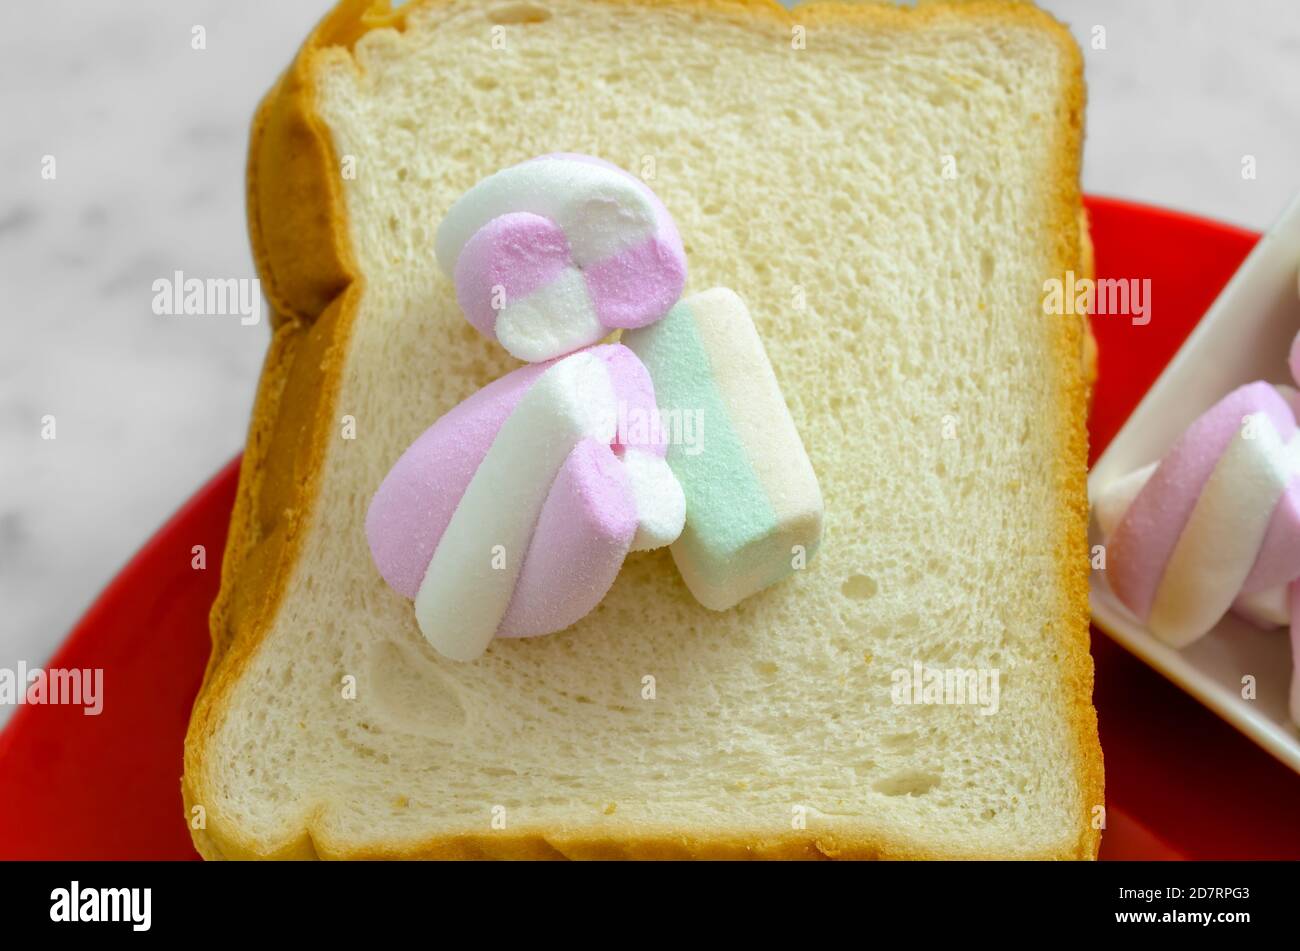 Pastel Colored Marshmallows on a slice of Bread ready to be sandwiched. Stock Photo